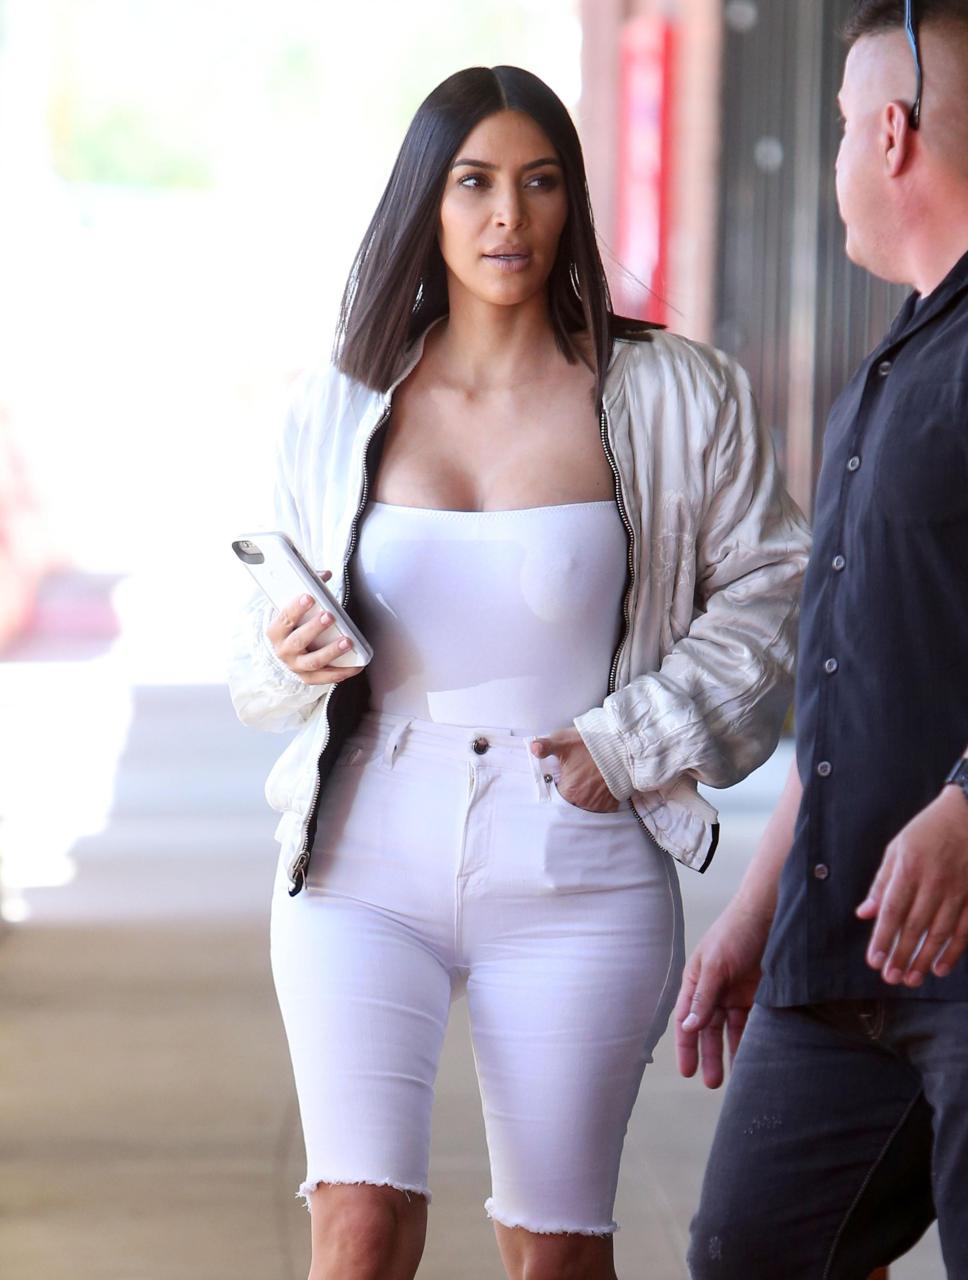 Kim Kardashian ditches the bra as she shows off her busty figure in white vest top | The Sun